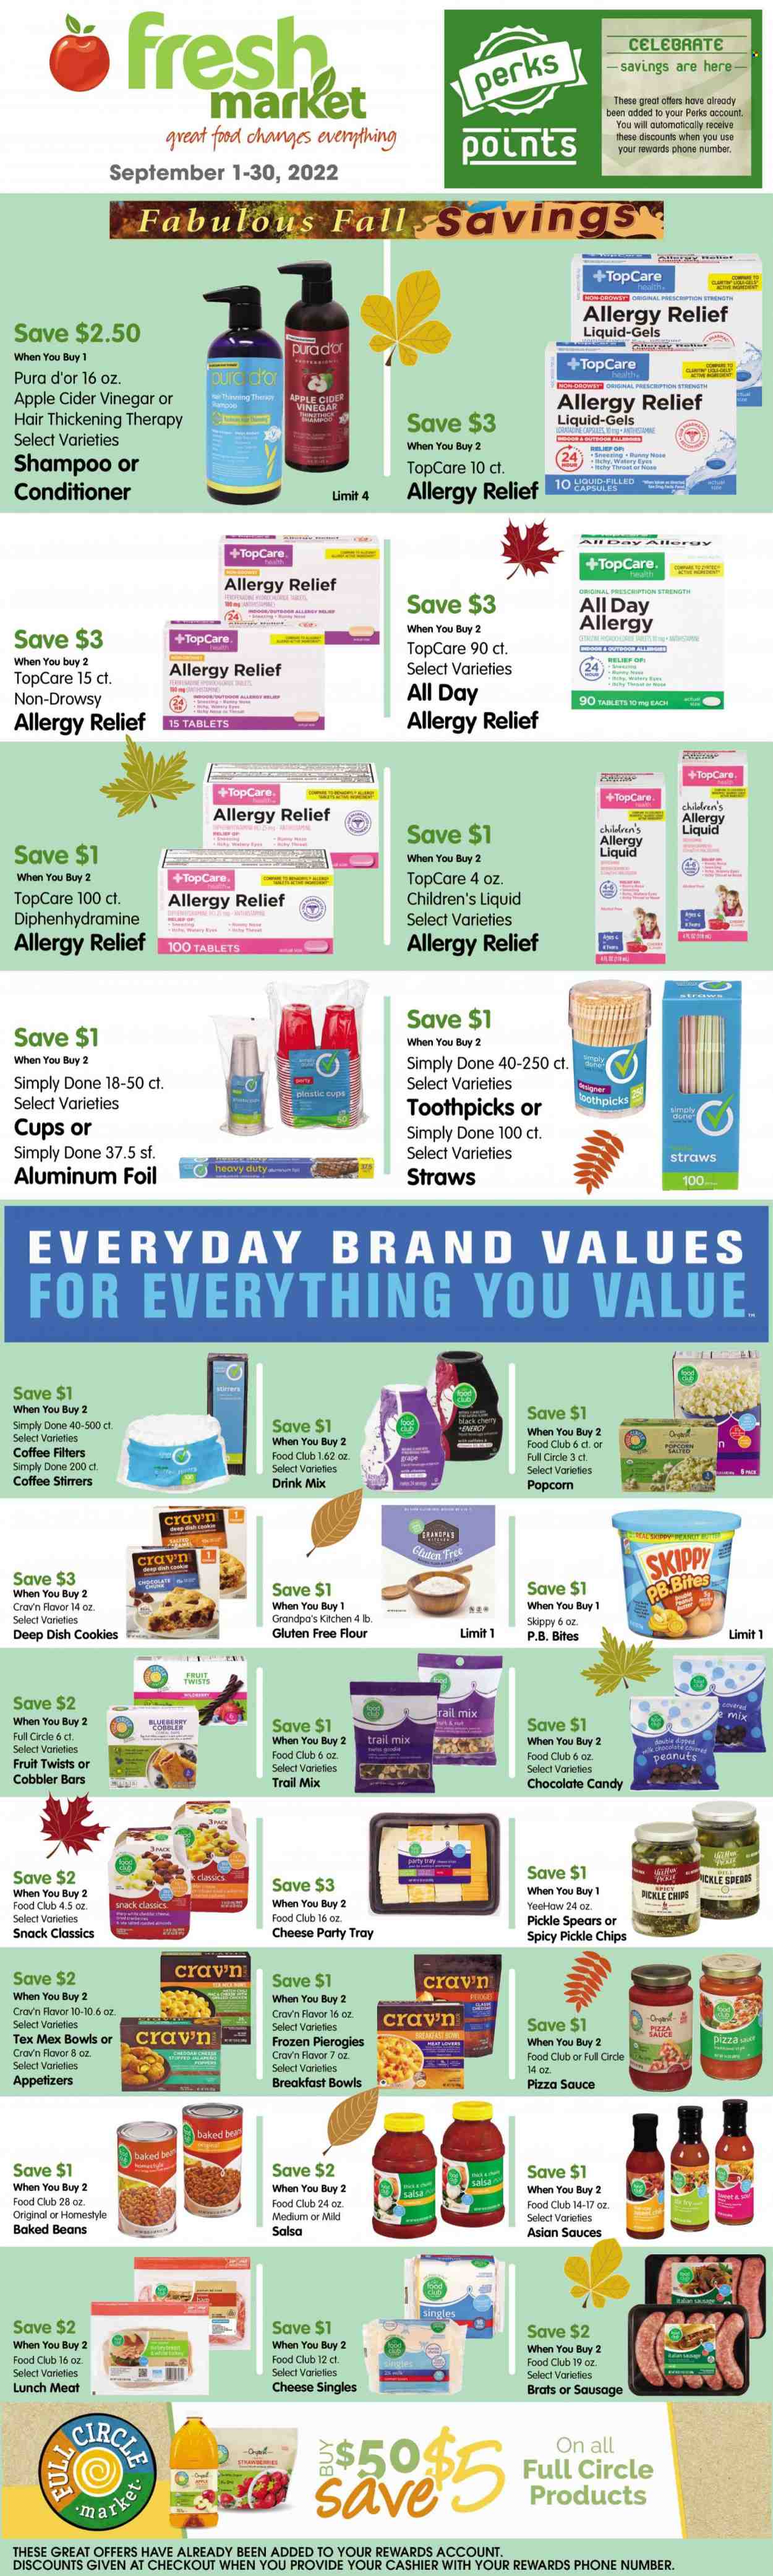 thumbnail - Fresh Market Flyer - 09/01/2022 - 09/30/2022 - Sales products - cake, jalapeño, strawberries, breakfast bowl, ham, smoked ham, sausage, italian sausage, lunch meat, cookies, milk chocolate, snack, cereal bar, chocolate candies, popcorn, flour, cranberries, baked beans, cereals, dill, salsa, apple cider vinegar, peanut butter, almonds, cashews, peanuts, dried fruit, trail mix, coffee, turkey breast, shampoo, conditioner, cup, straw, aluminium foil, roller, Zyrtec, allergy relief. Page 1.